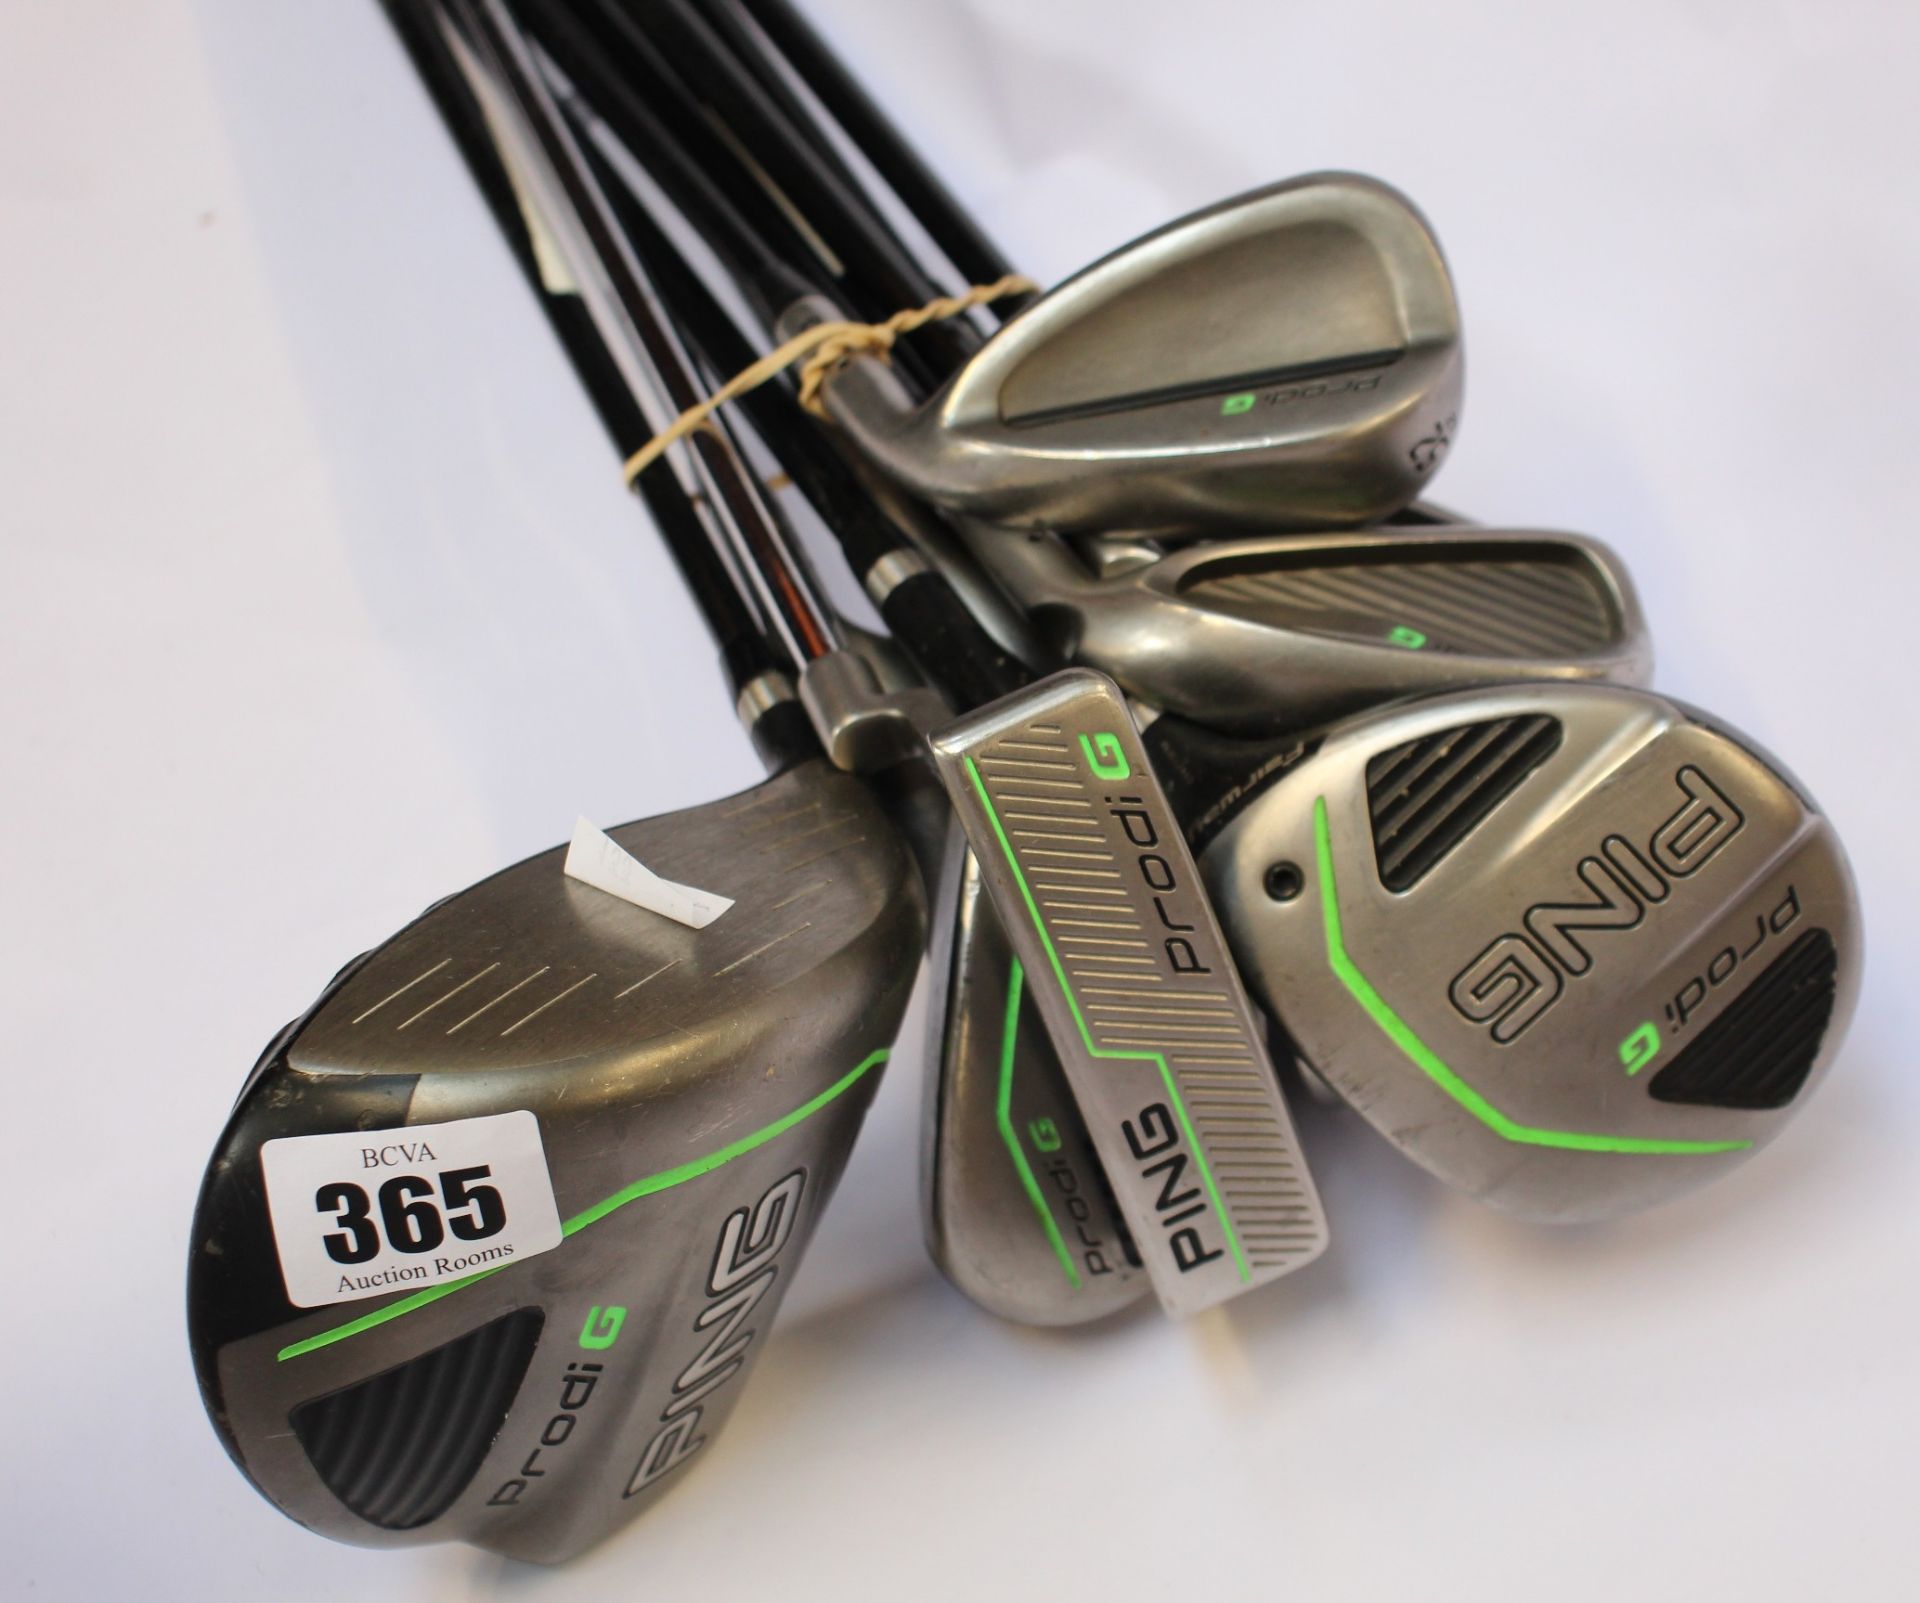 A set of Pre-owned Ping Prodi G junior golf clubs to include; driver, fairway, hybrid, irons (6,7,